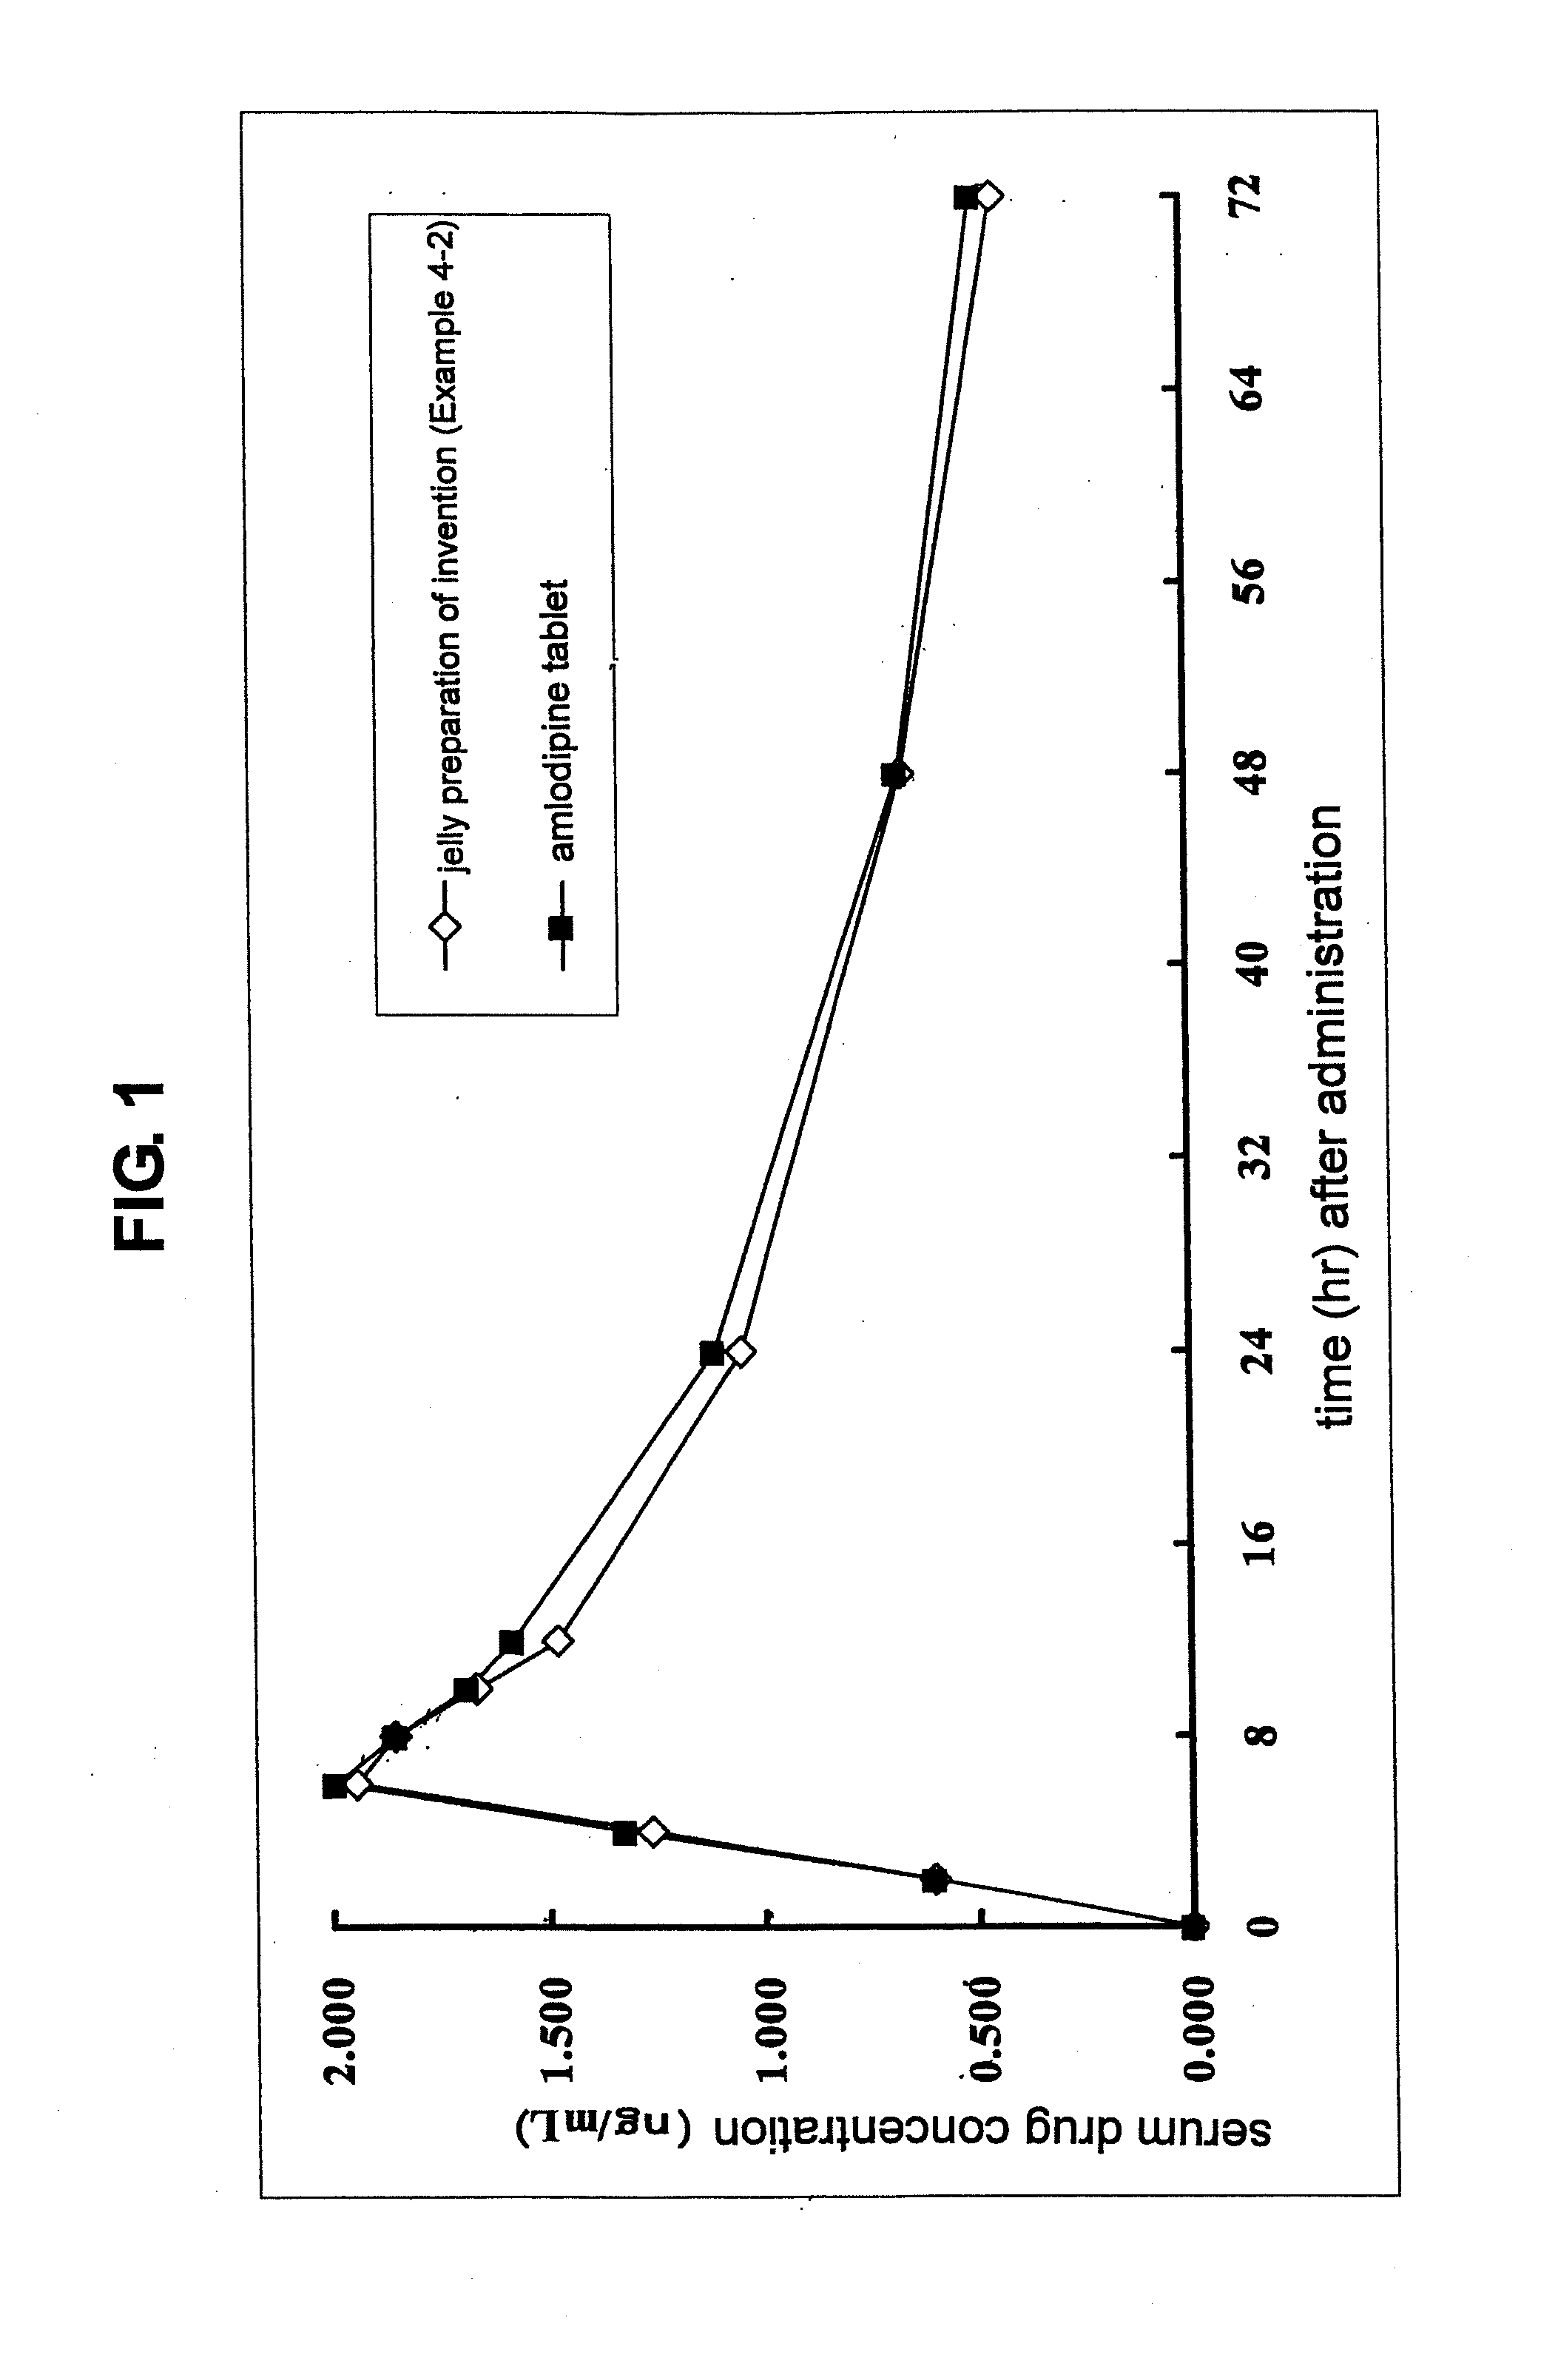 Aqueous oral preparation of stable amlodipine